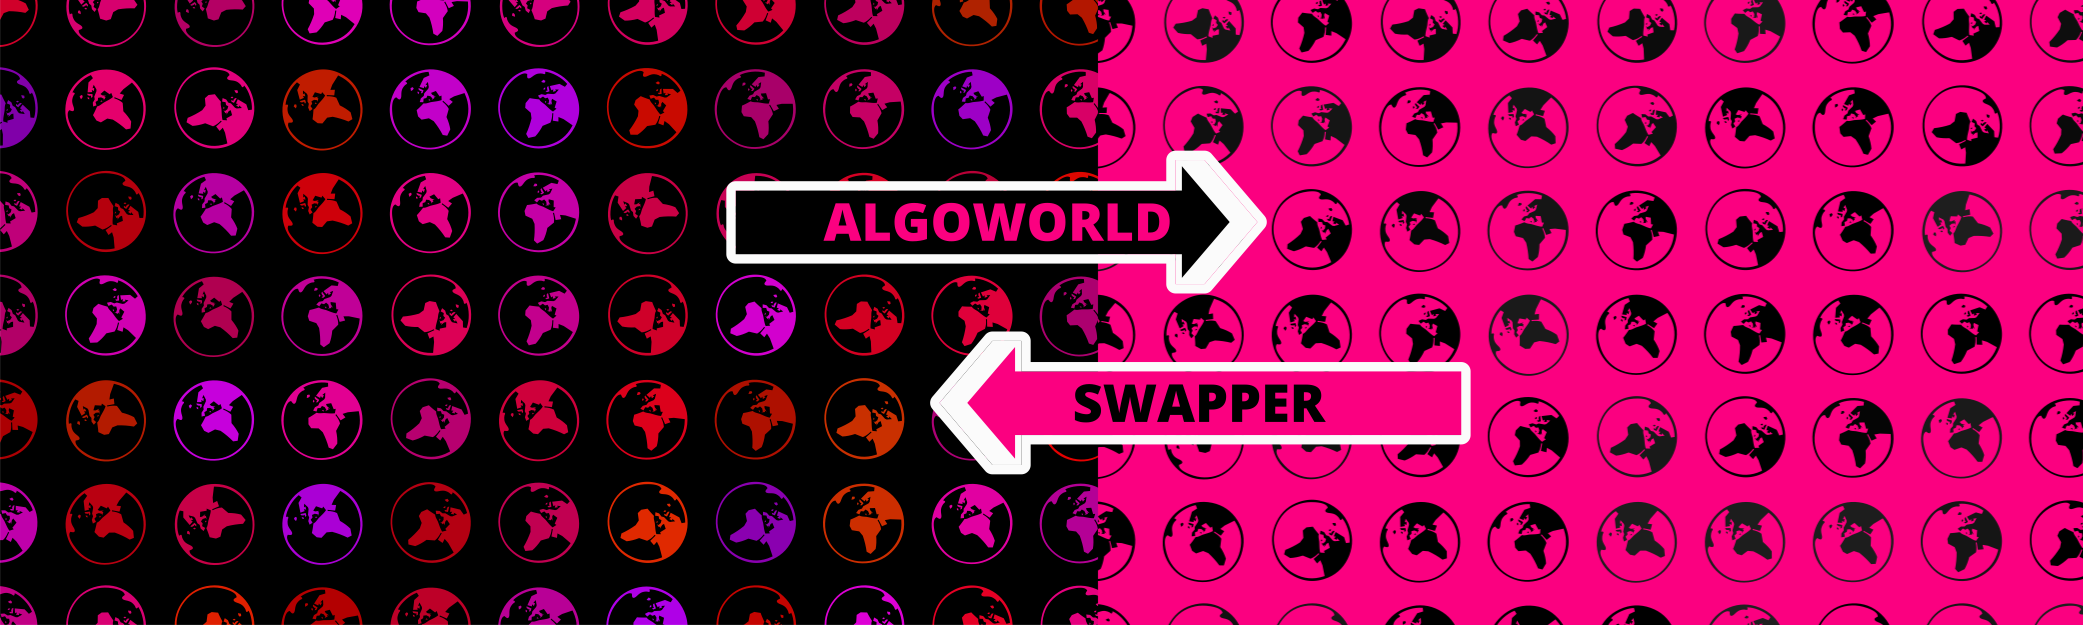 algoworld-swapper